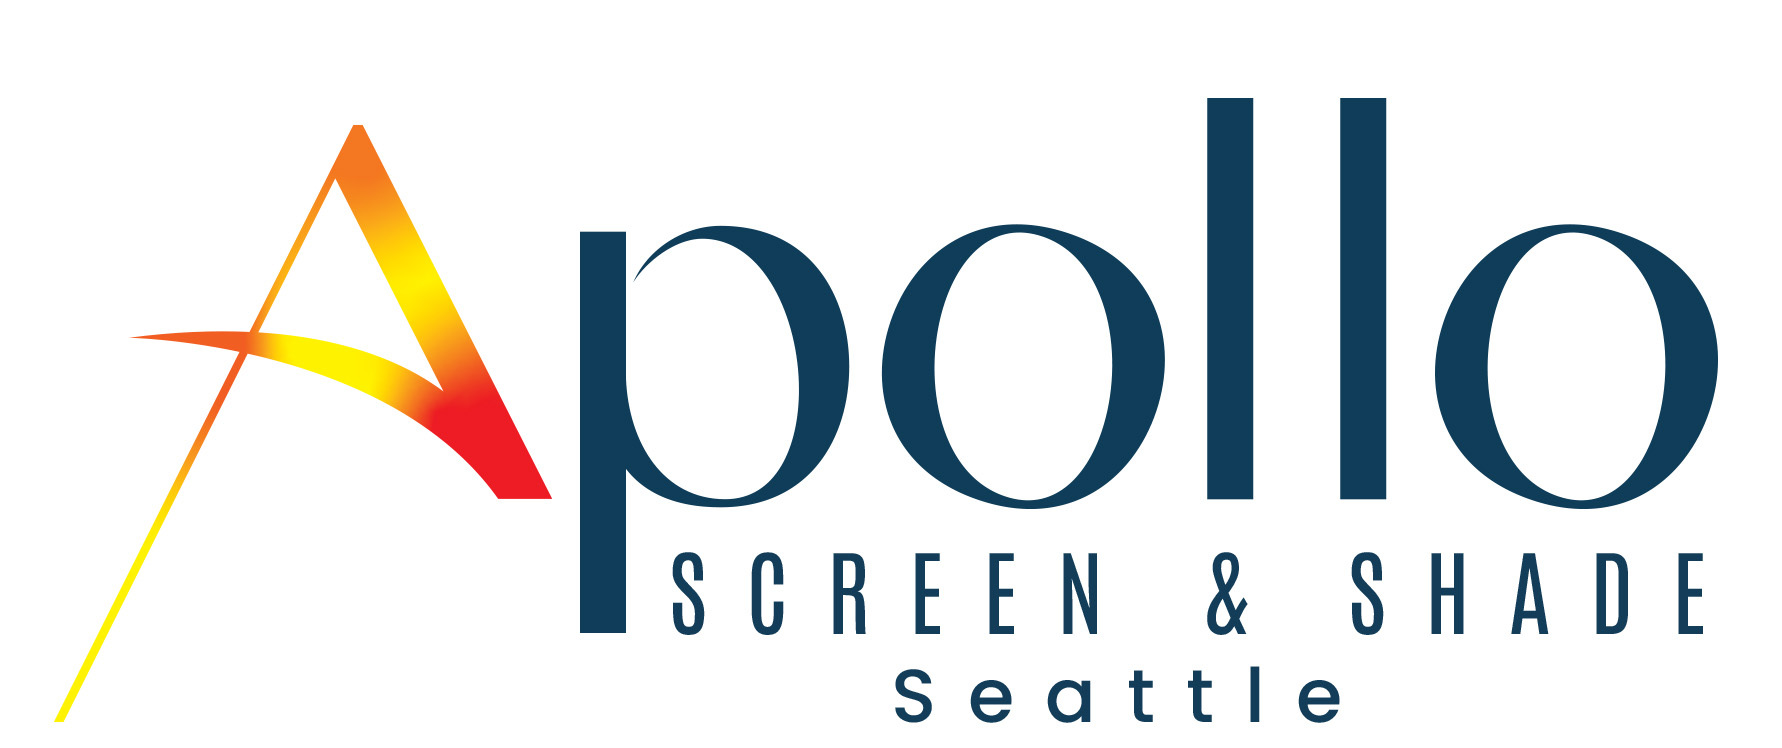 Apollo Screen & Shade to Become Top Screen and Shade Provider in North America